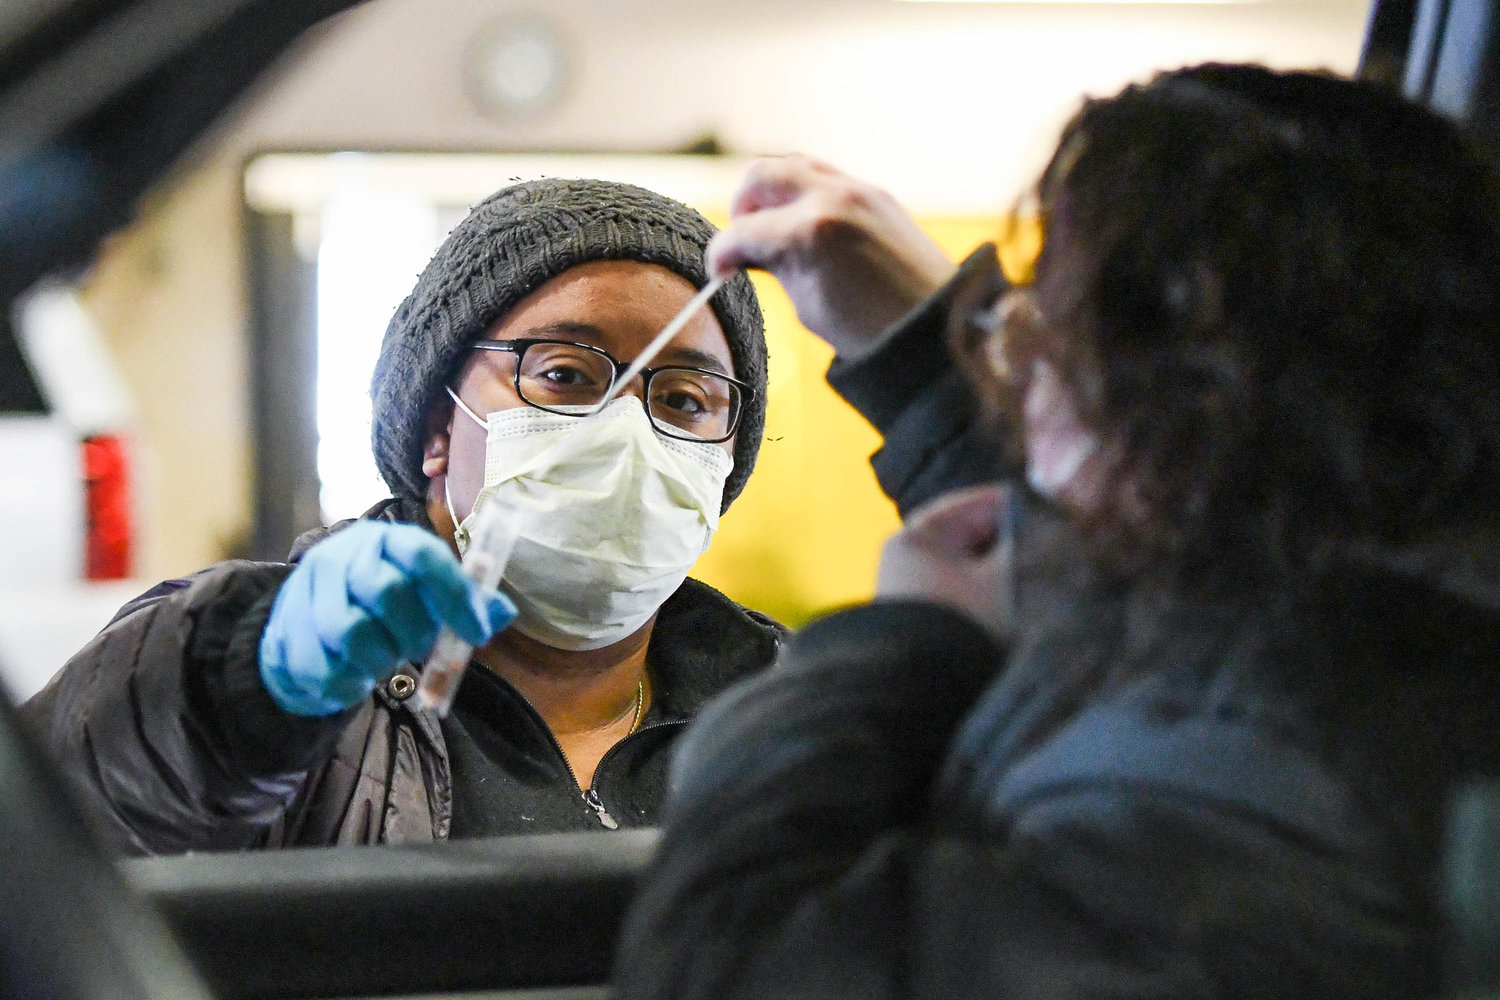 Noelle Feliz, left, holds out a test tube as a woman puts a nasal swab into it on Monday, Feb. 7 at Griffiss Internation Airport. Precision Clinical Laboratories offered drive-thru COVID-19 testing at Griffiss International Airport.